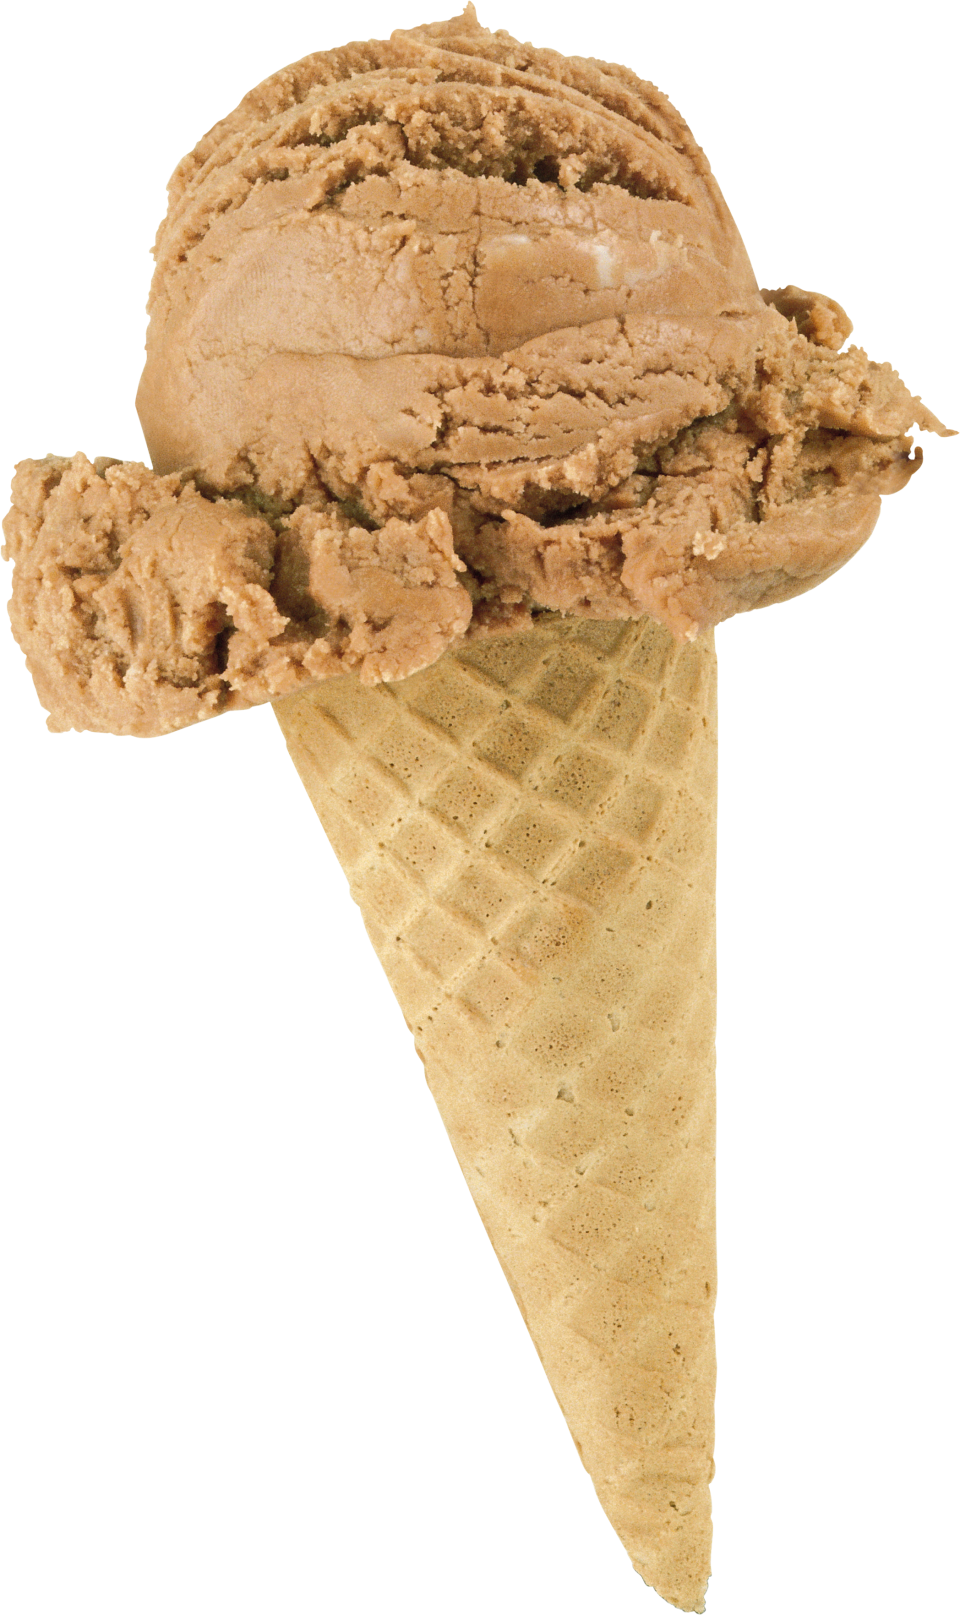 Download Chocolate Ice Cream Cone PNG Image - PurePNG | Free transparent CC0 PNG Image Library